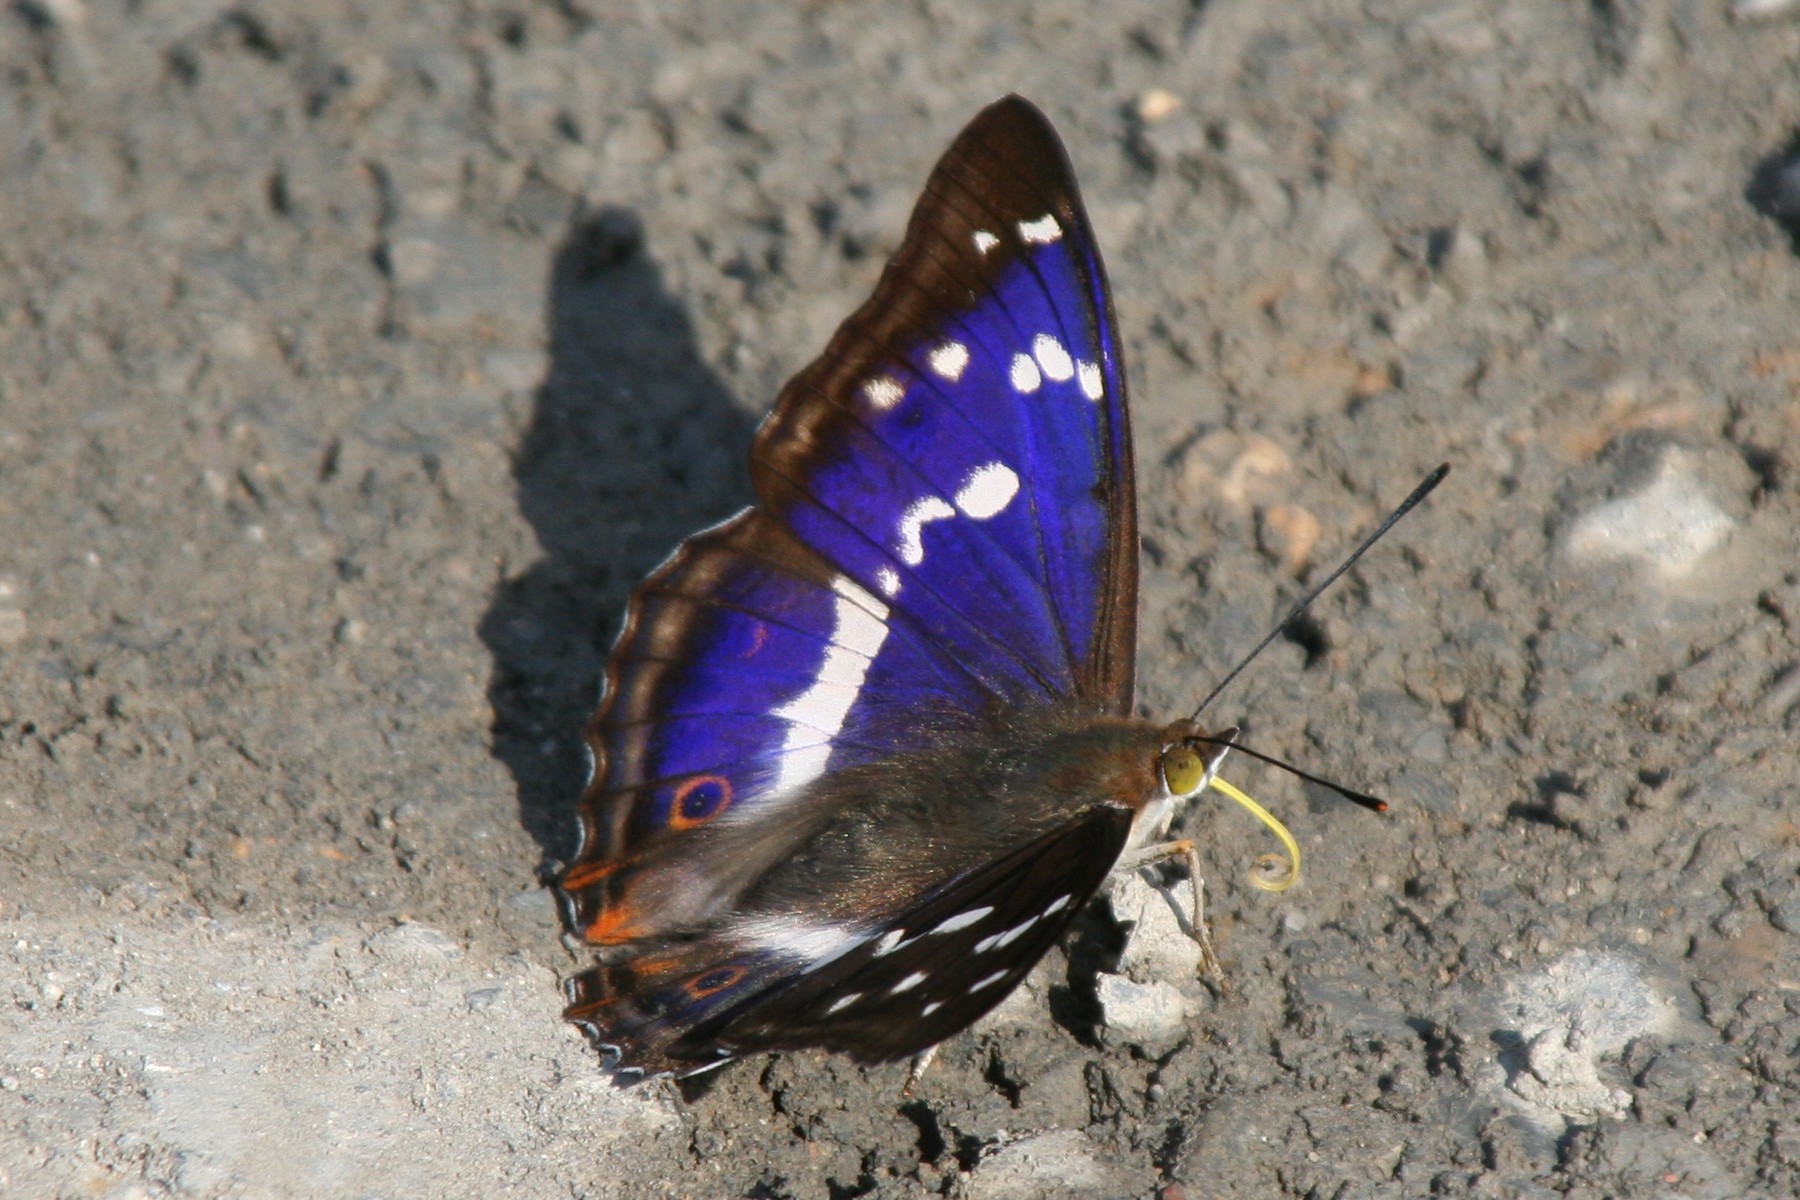 Apatura iris - purple colored butterfly species